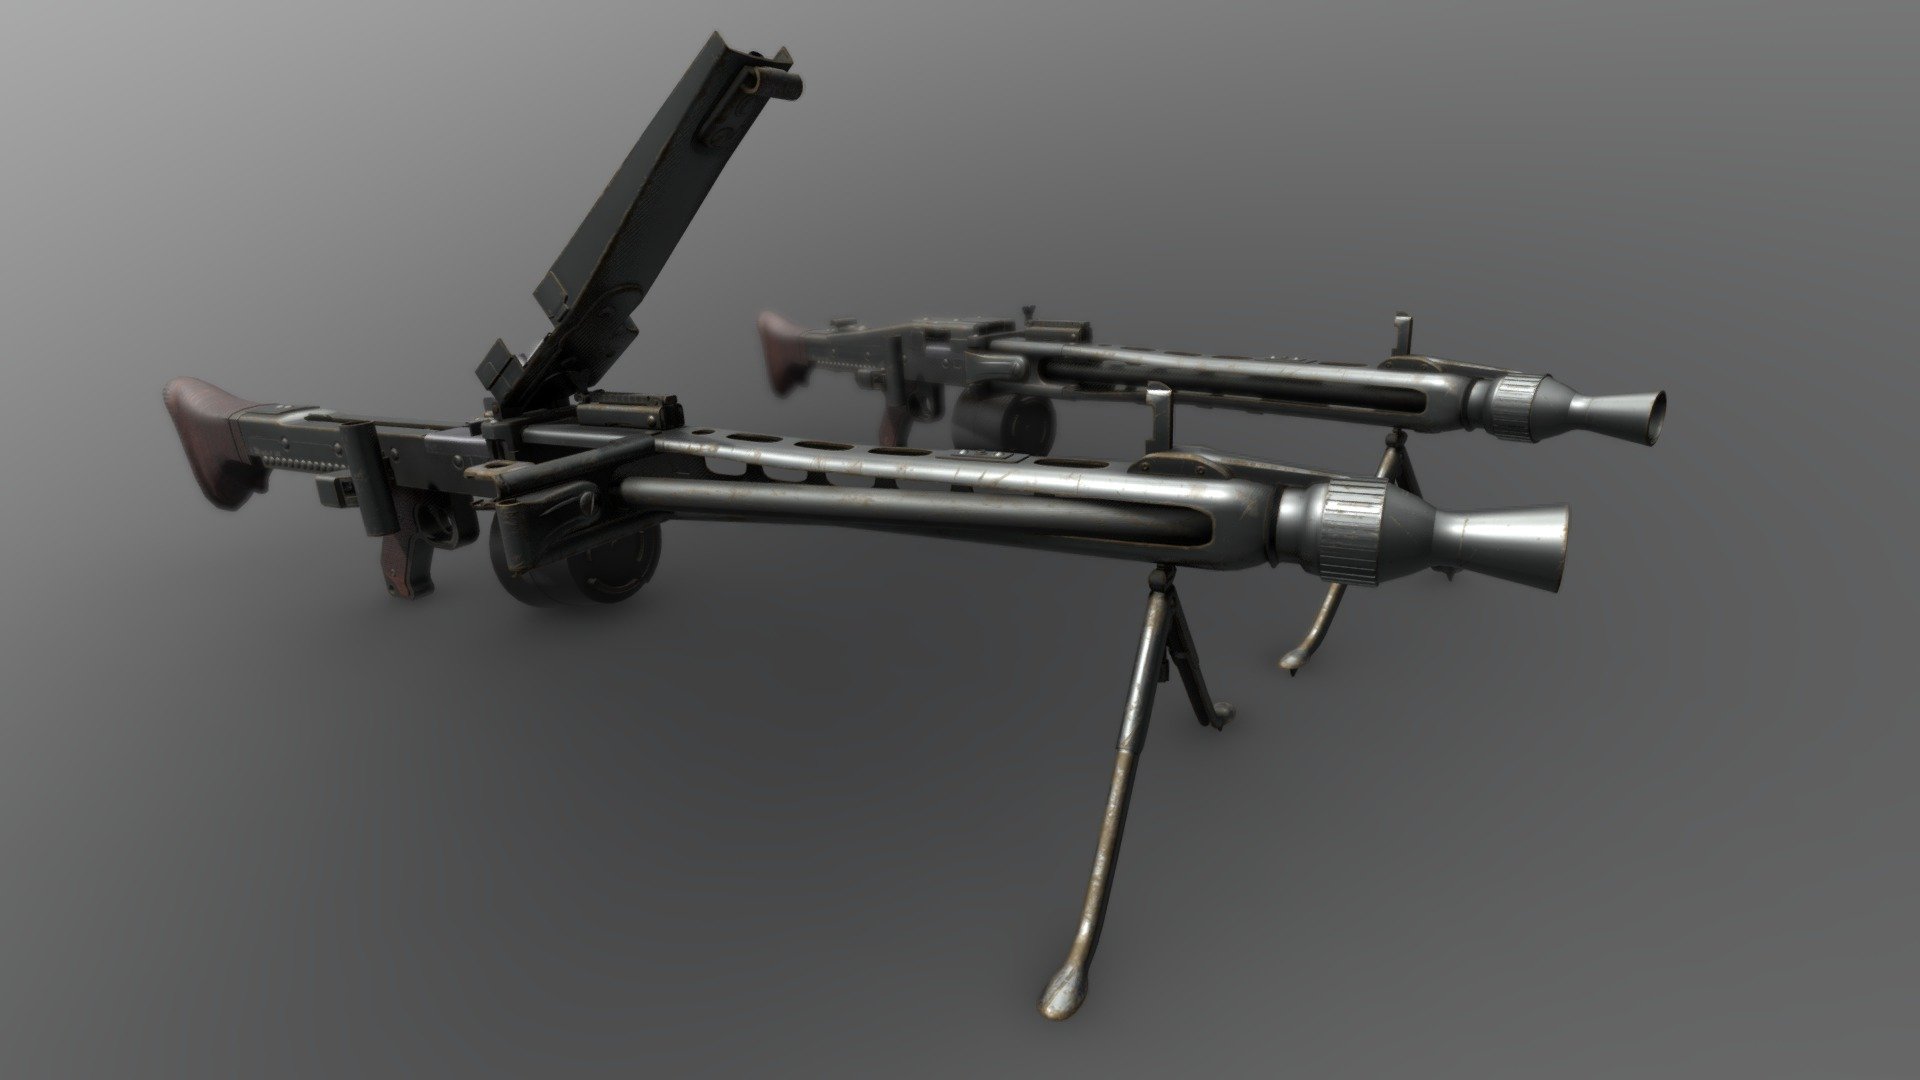 Made with Blender and Substance

44k Quads

The blender file is in the additional files; there's a basic rig of the cover and the trapdoor.

I used it for a tracking try - German Medium Machine Gun - MG3 - MG42 Variant - Buy Royalty Free 3D model by Batton 3d model